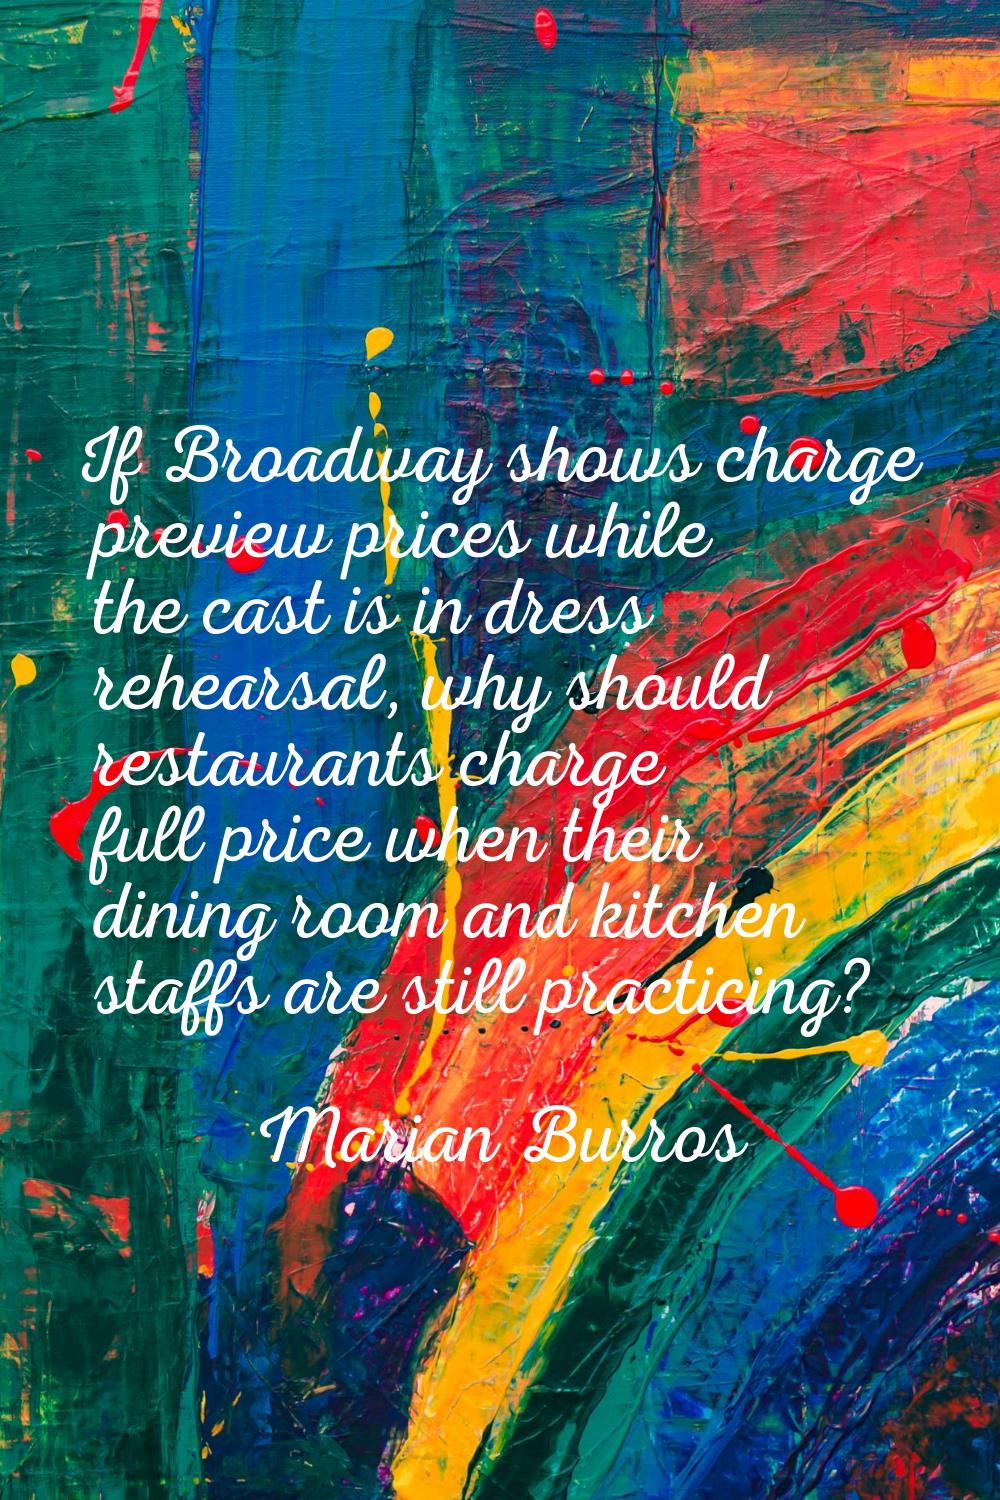 If Broadway shows charge preview prices while the cast is in dress rehearsal, why should restaurant